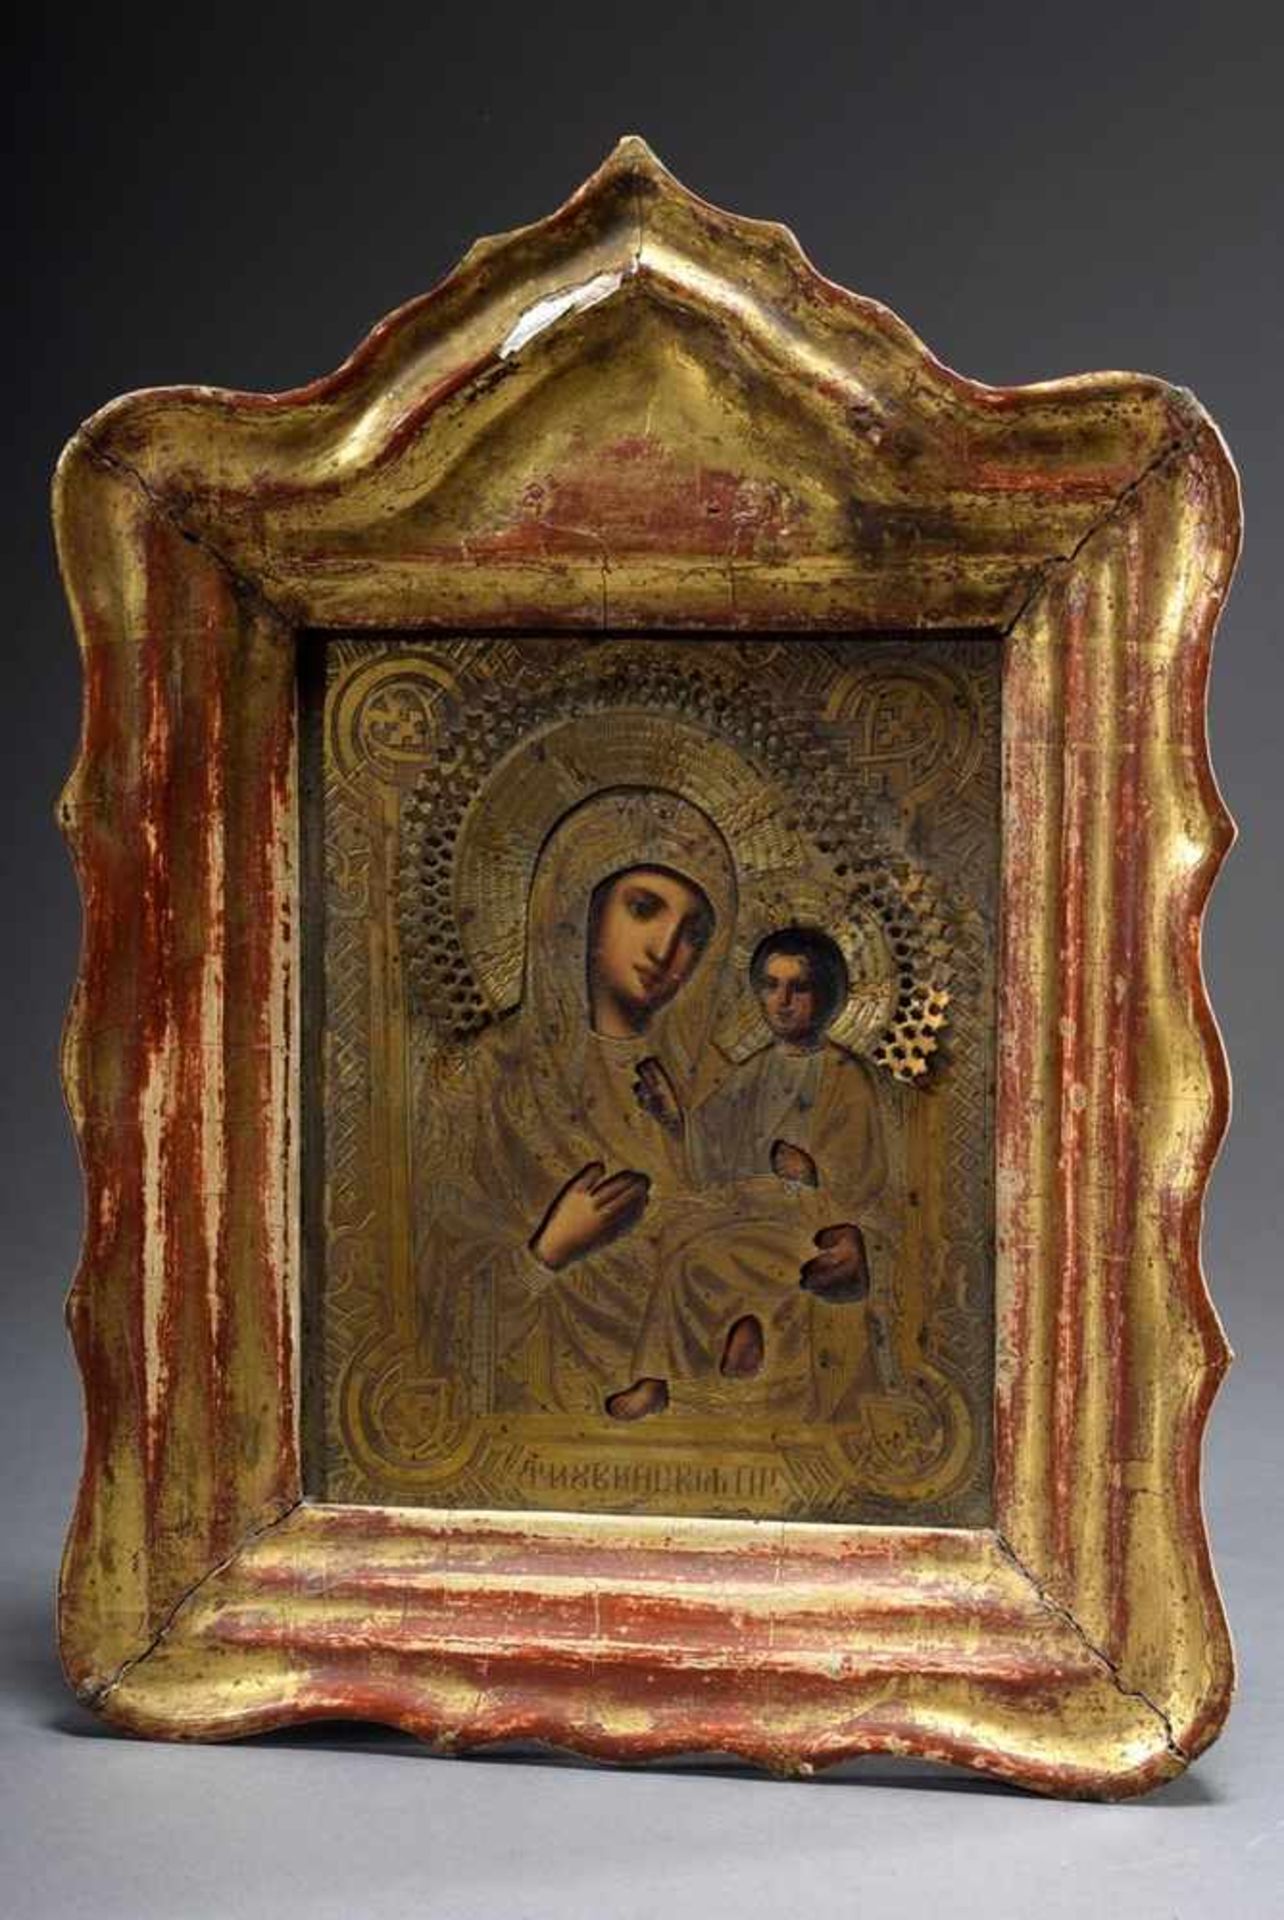 Russian icon "Mother of God" under punched brass oklad, egg tempera/chalk ground over wood, in